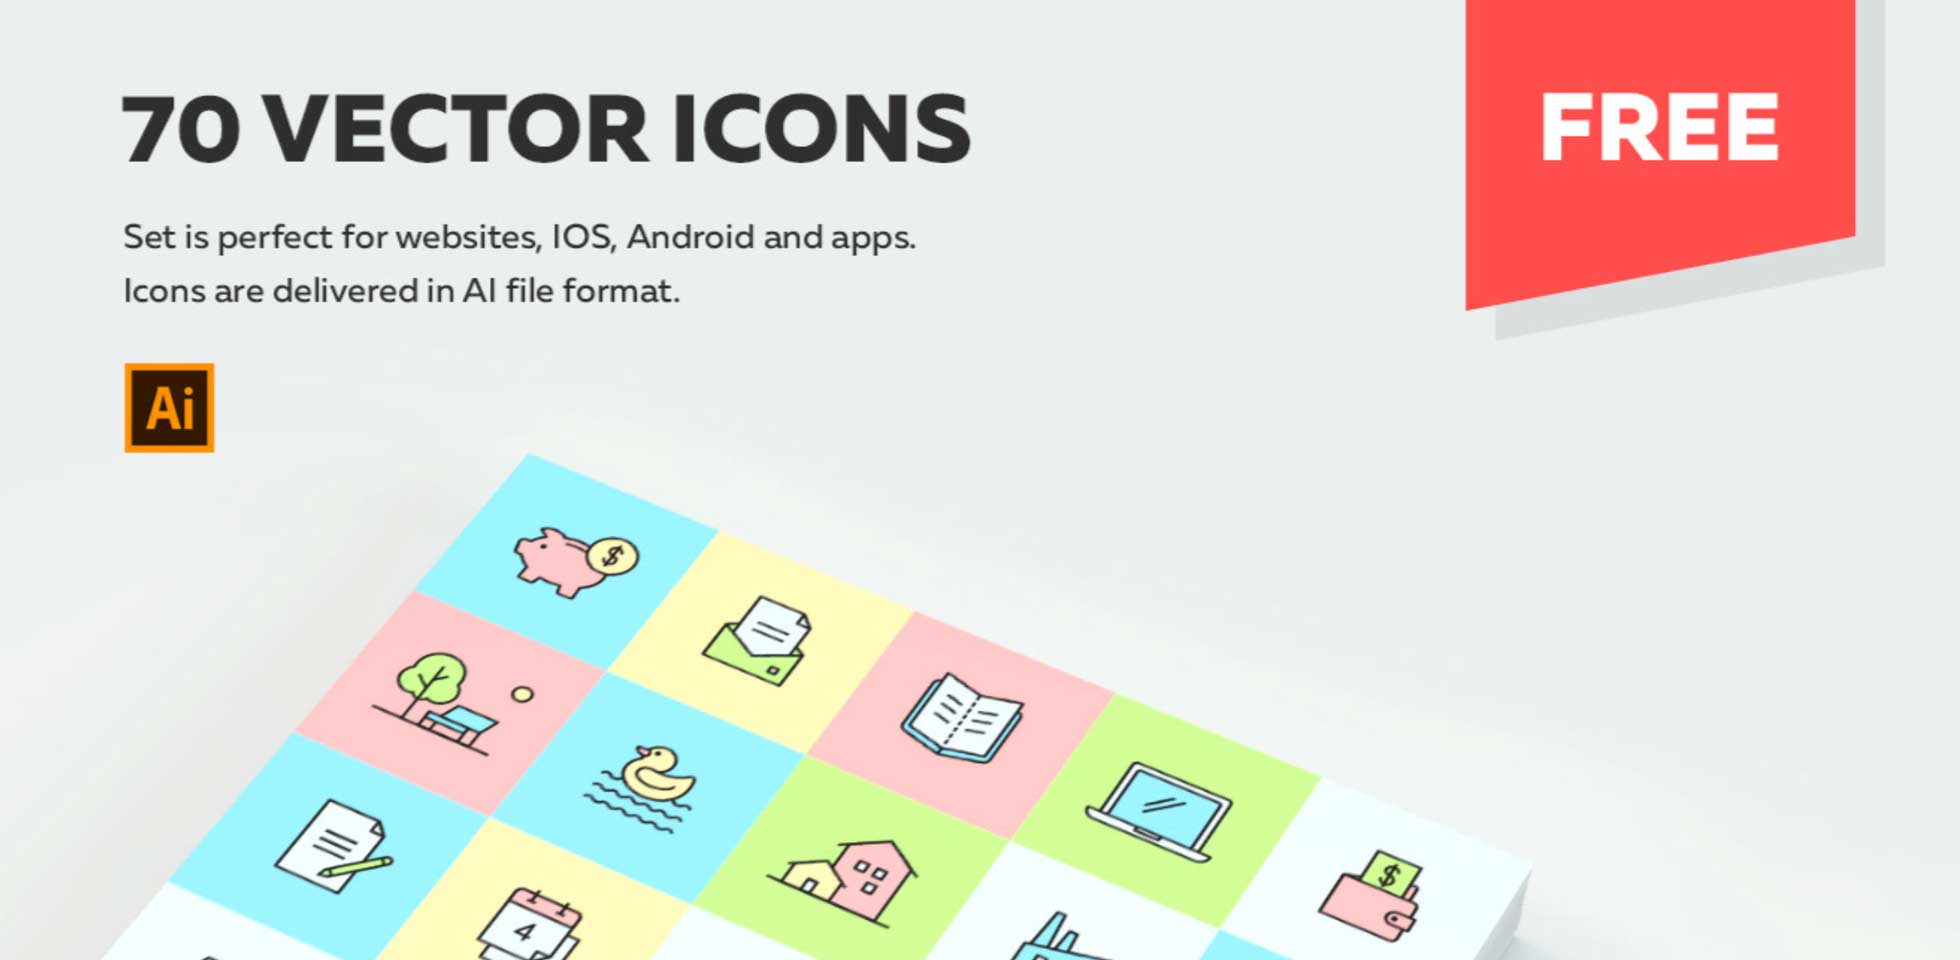 Free Download: 70 Multipurpose Vector Icons